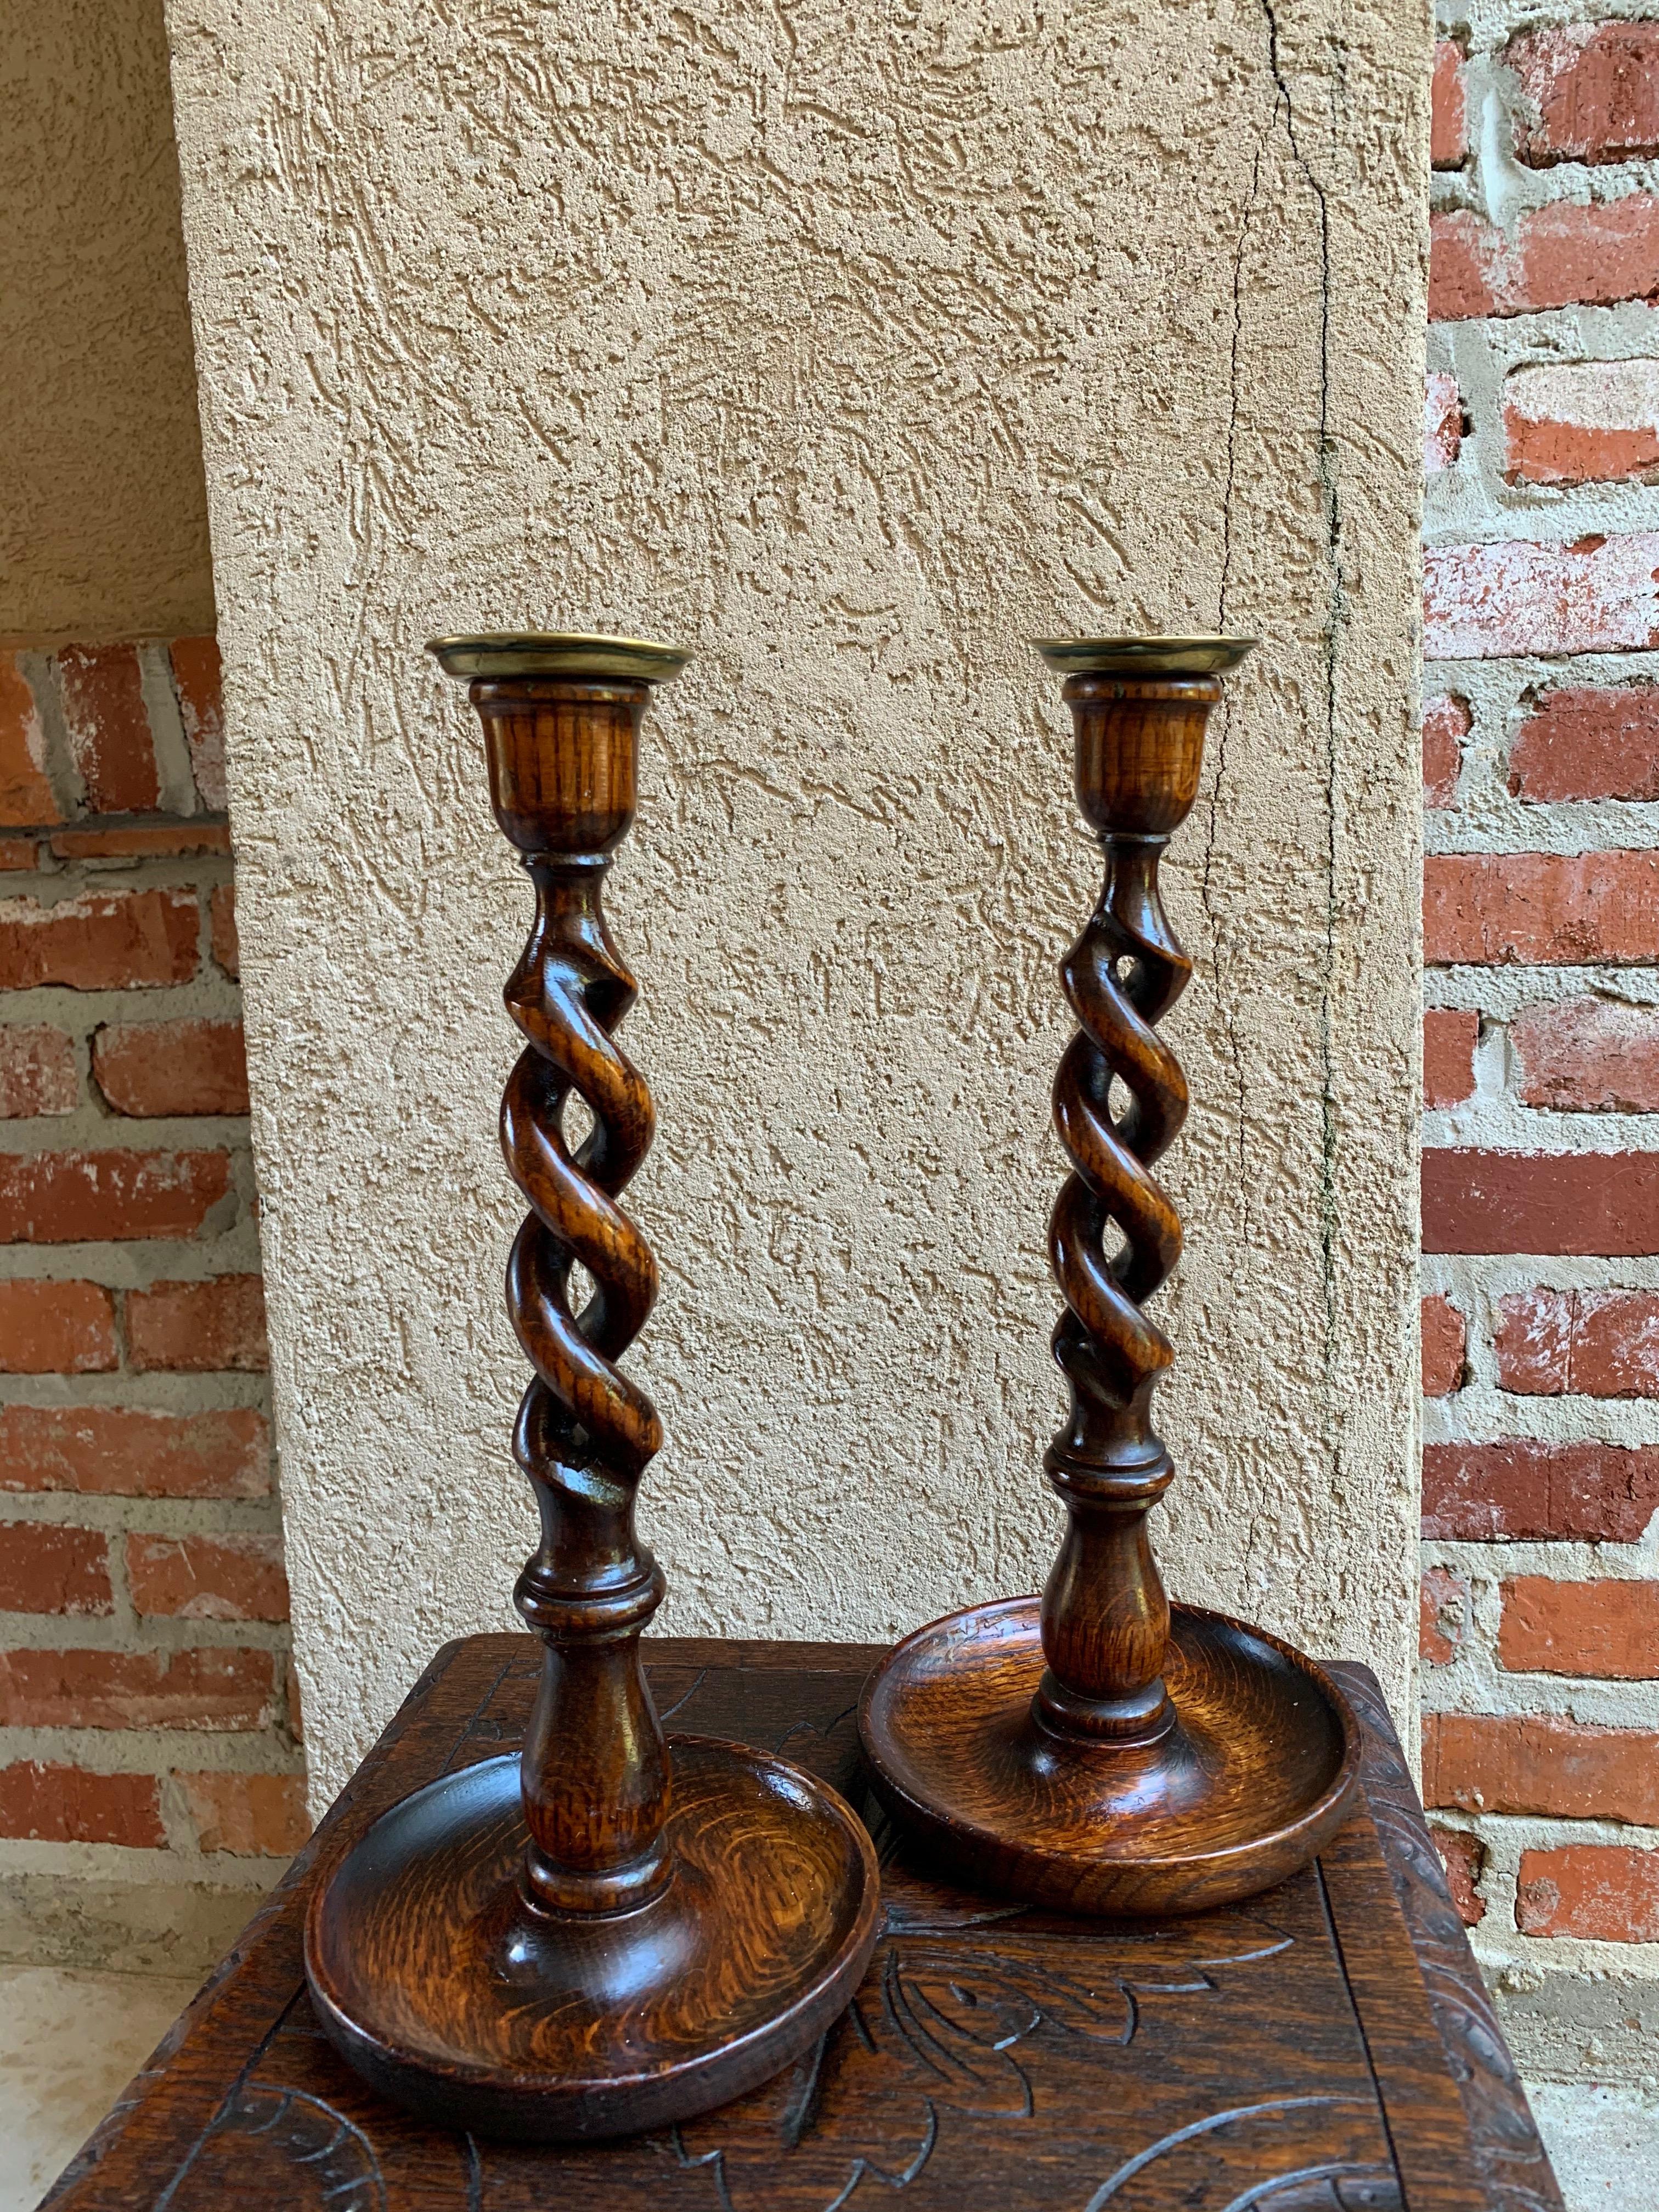 ~Just arrived from England~
Another lovely pair of antique English oak barley twist candlesticks!
~Open barley twist. 